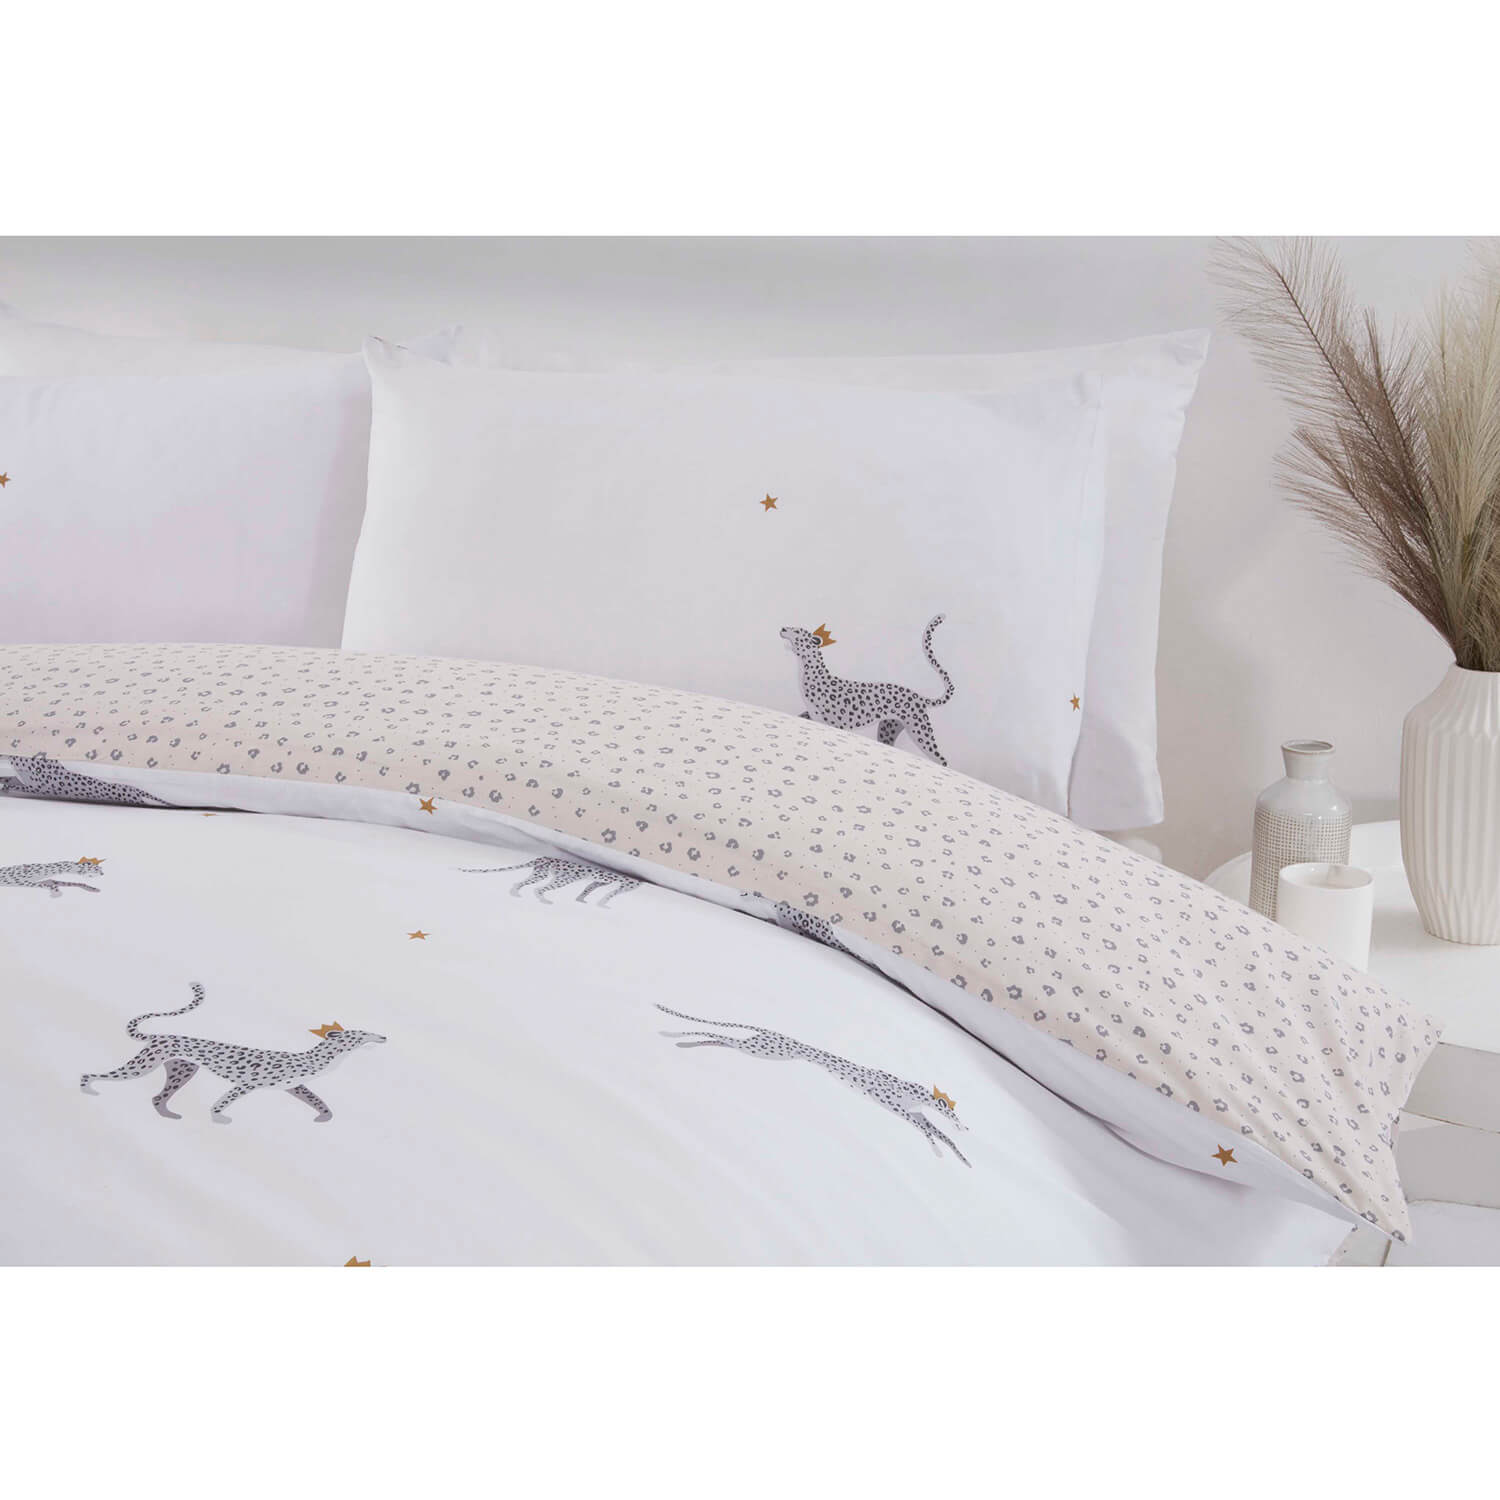  The Home Collection Leopard Duvet Cover Set - Multi 2 Shaws Department Stores